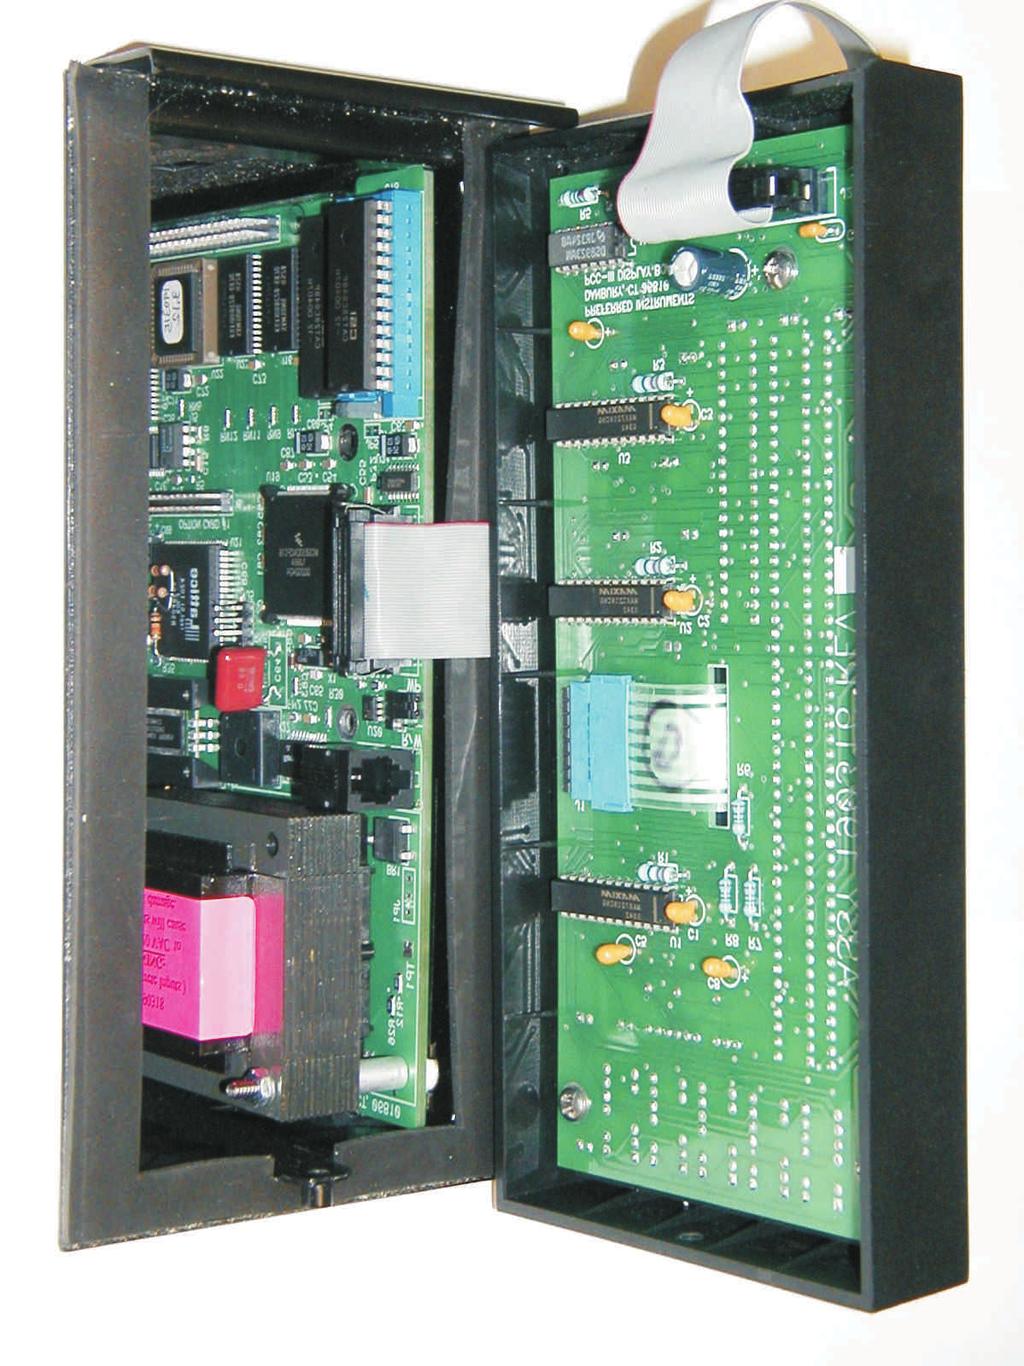 OPM 4000 Instruction Manual Novemebr 2007 Backup Memory Module 1. Remove screw on top of the control unit (Figure 7-6). 2. Open control unit front panel to access the backup memory module. 3.